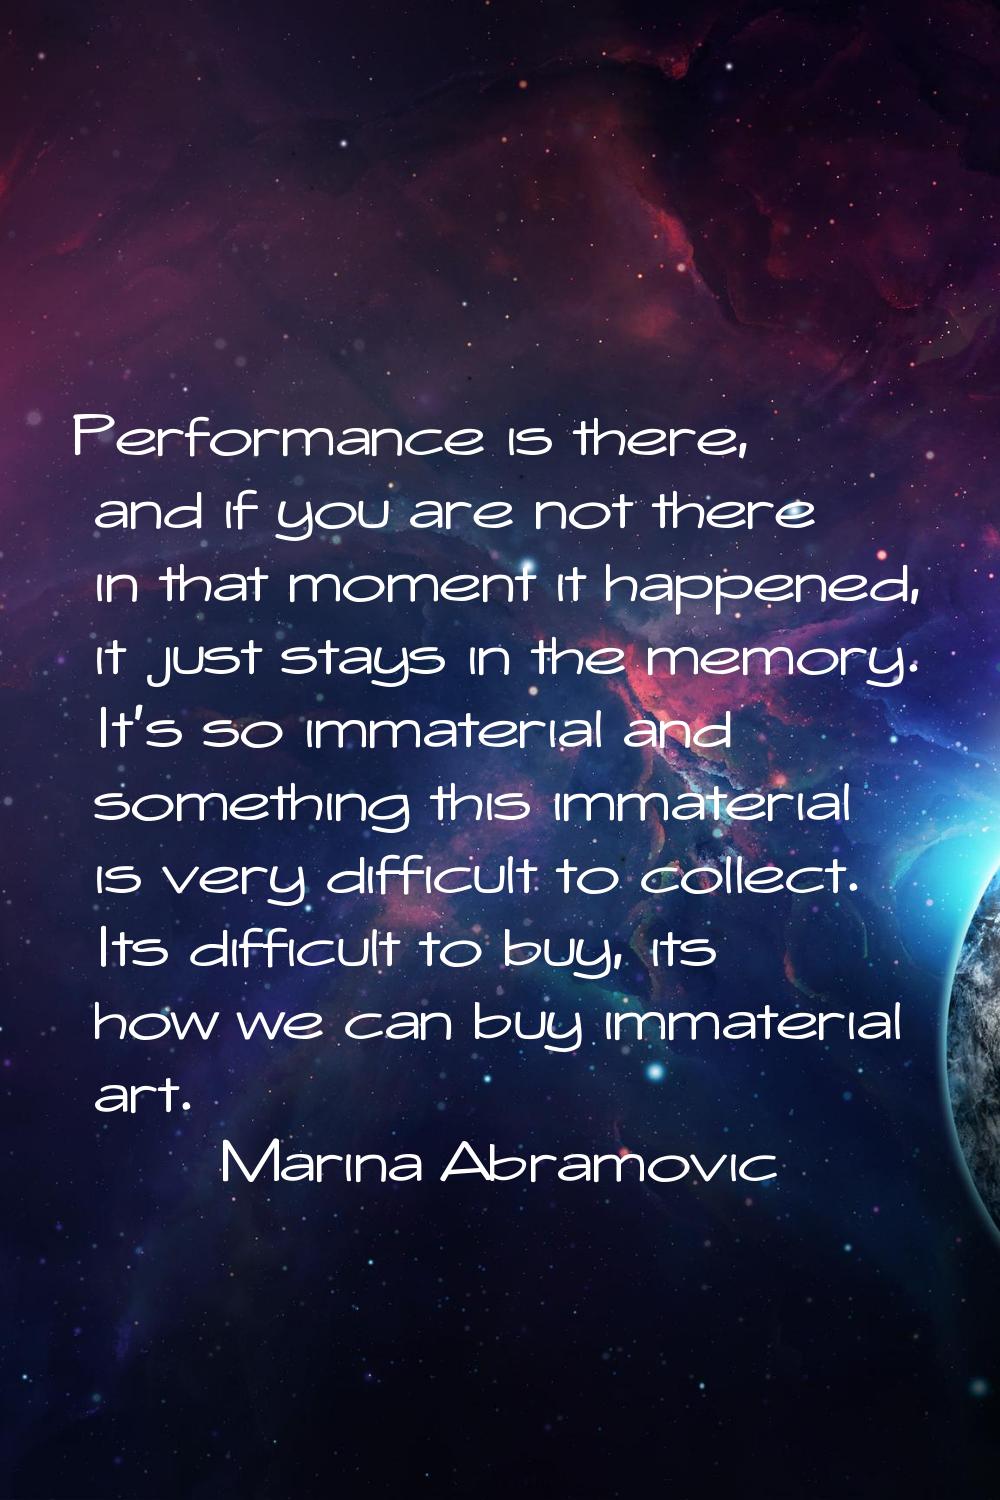 Performance is there, and if you are not there in that moment it happened, it just stays in the mem